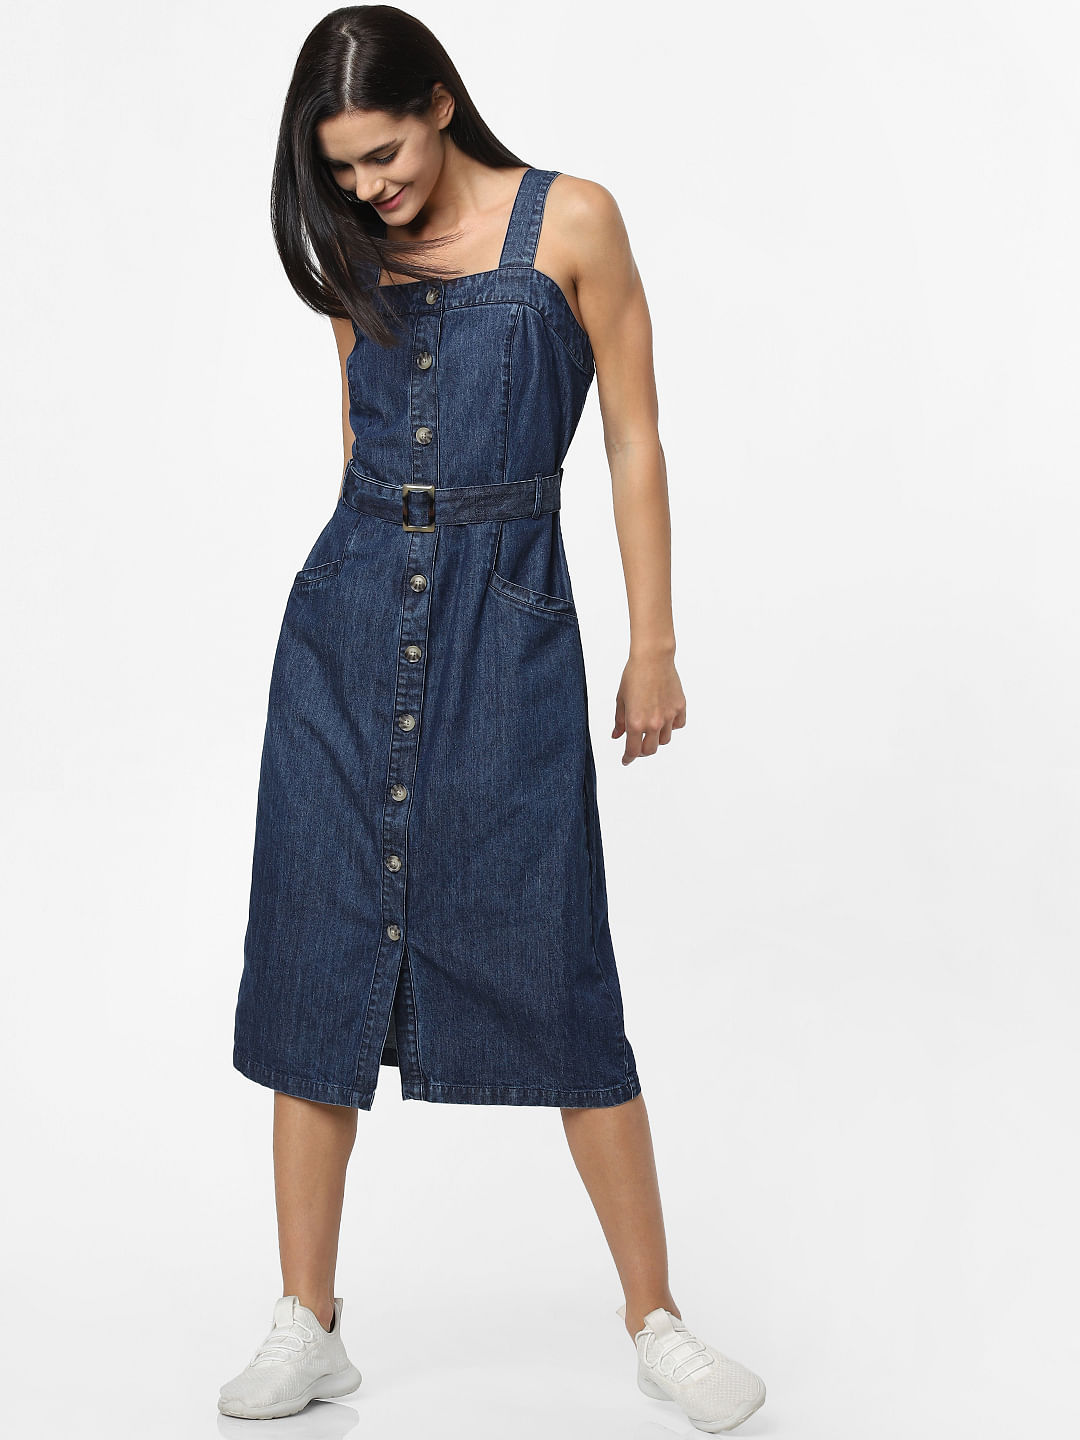 BZB Women's Button Front Adjustable Strap Denim Dress Sexy Bodycon Overall  Jean Midi Dress Light Blue : Buy Online at Best Price in KSA - Souq is now  Amazon.sa: Fashion